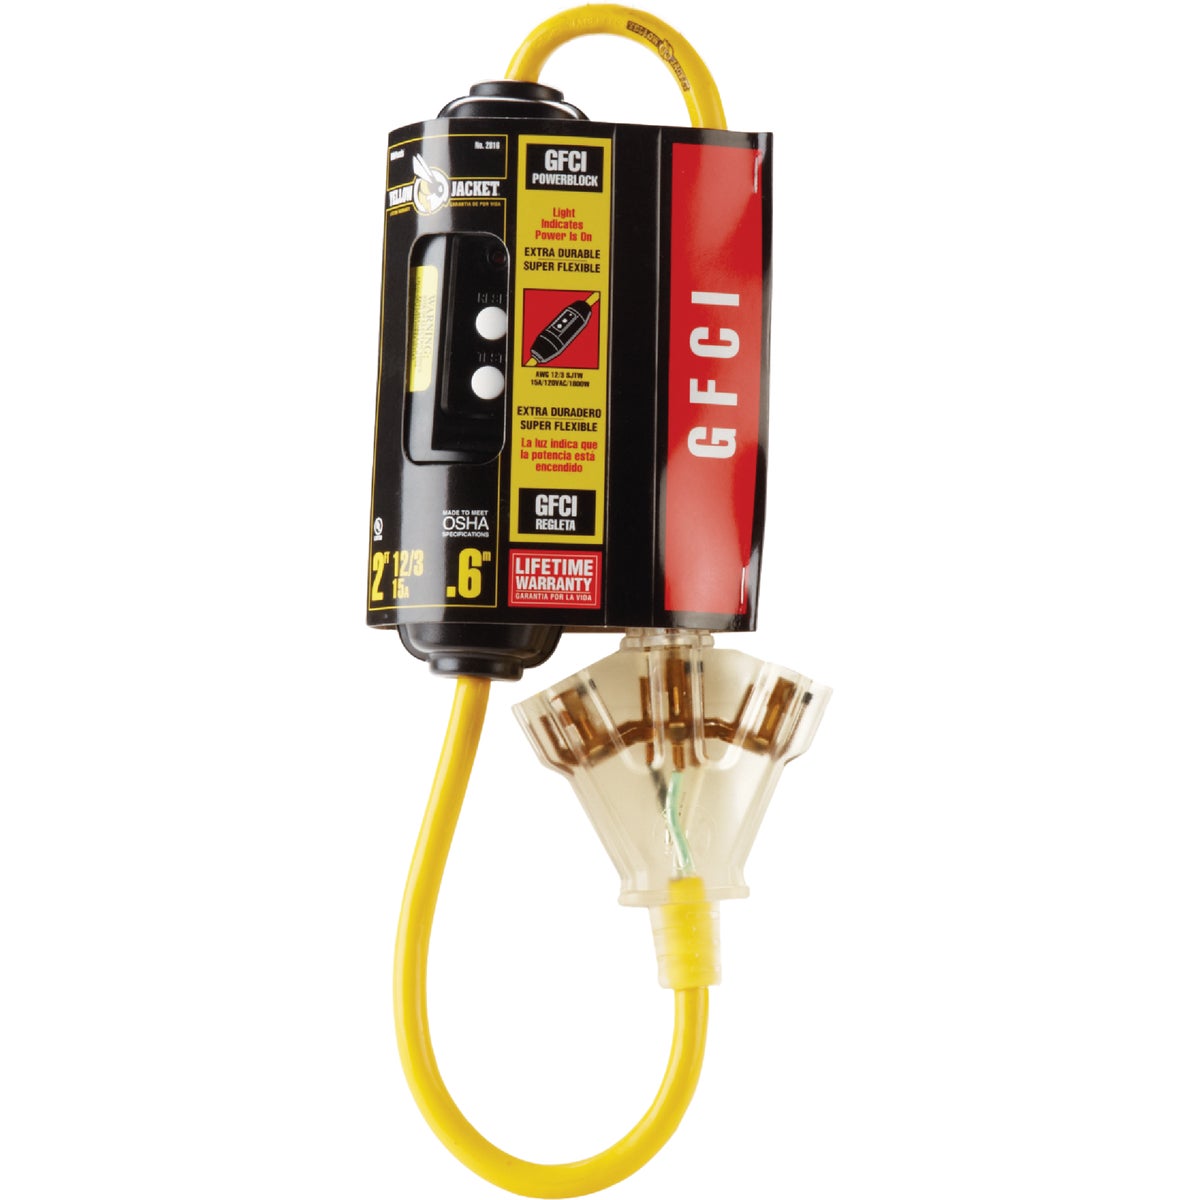 Item 532525, In-line GFCI (ground fault circuit interrupter) cord with 3-outlet power 